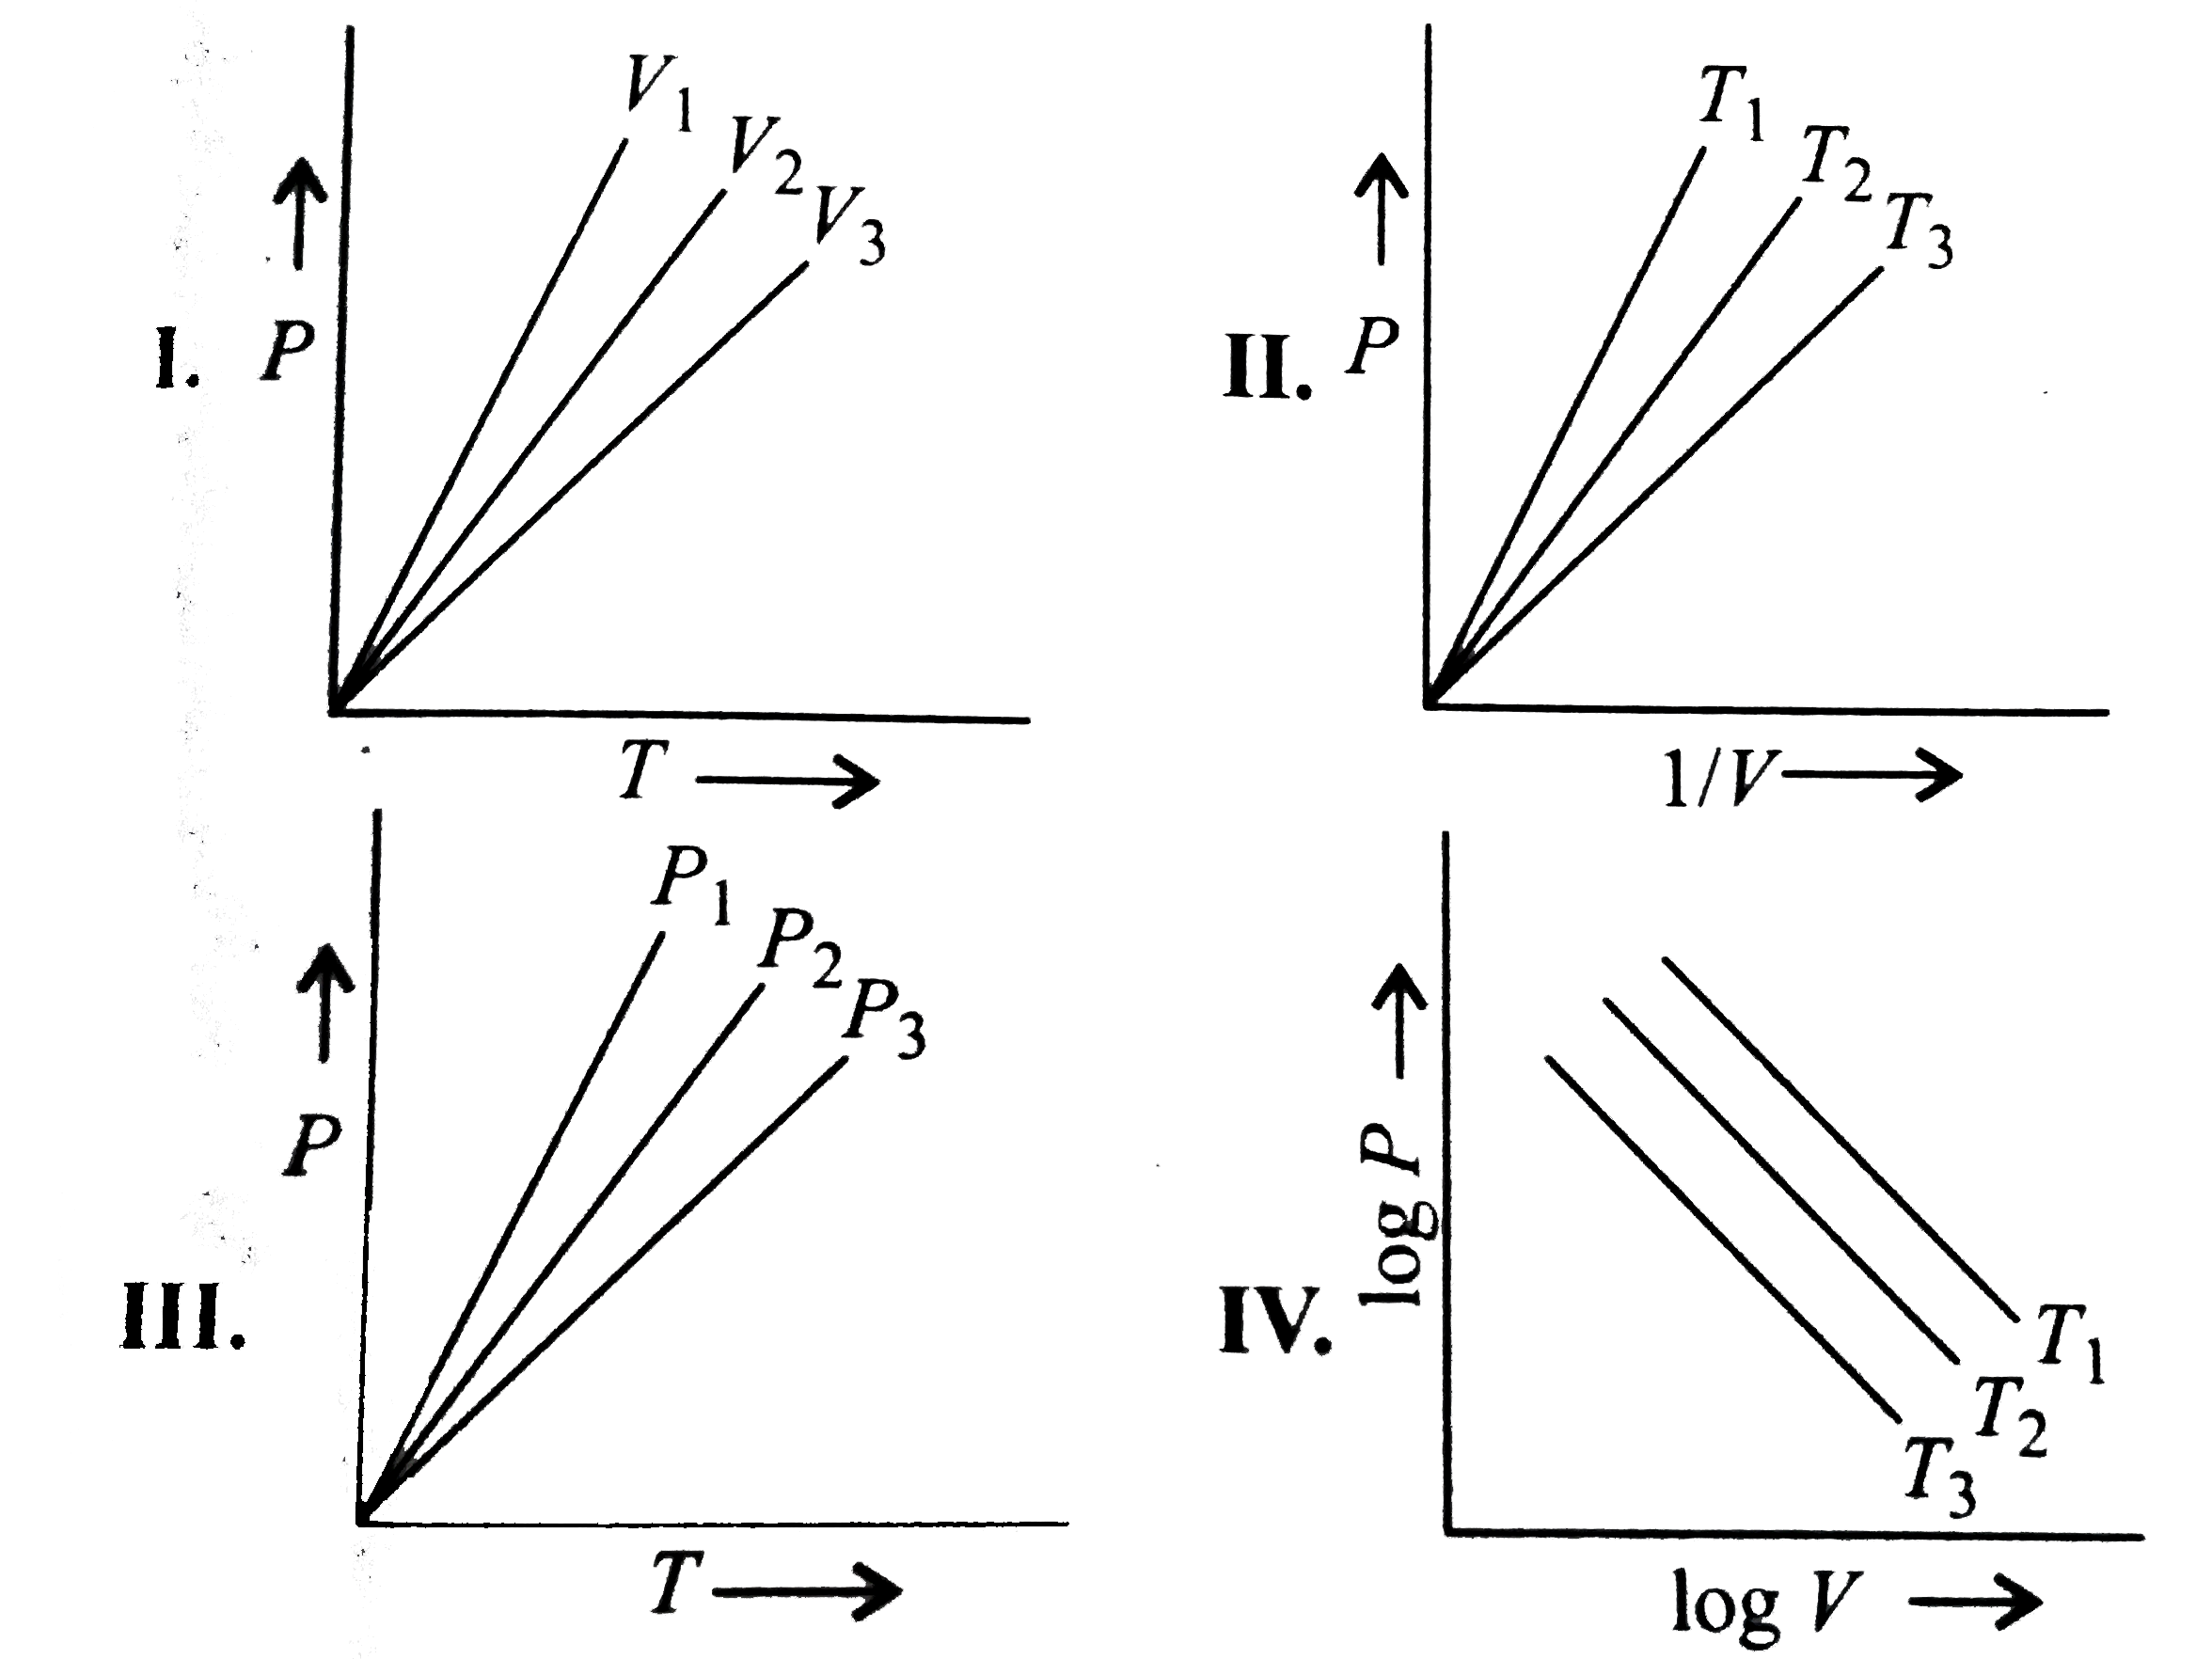 For 1 mol of an ideal gas, V(1)gtV(2)gtV(3) in fig. (I),T(1)gtT(2)gtT(3) in fig. (II), P(1)gtP(2)gtP(3) in fig. (III), and T(1)gtT(2)gtT(3) in fig. (IV) , then which curves are correct.